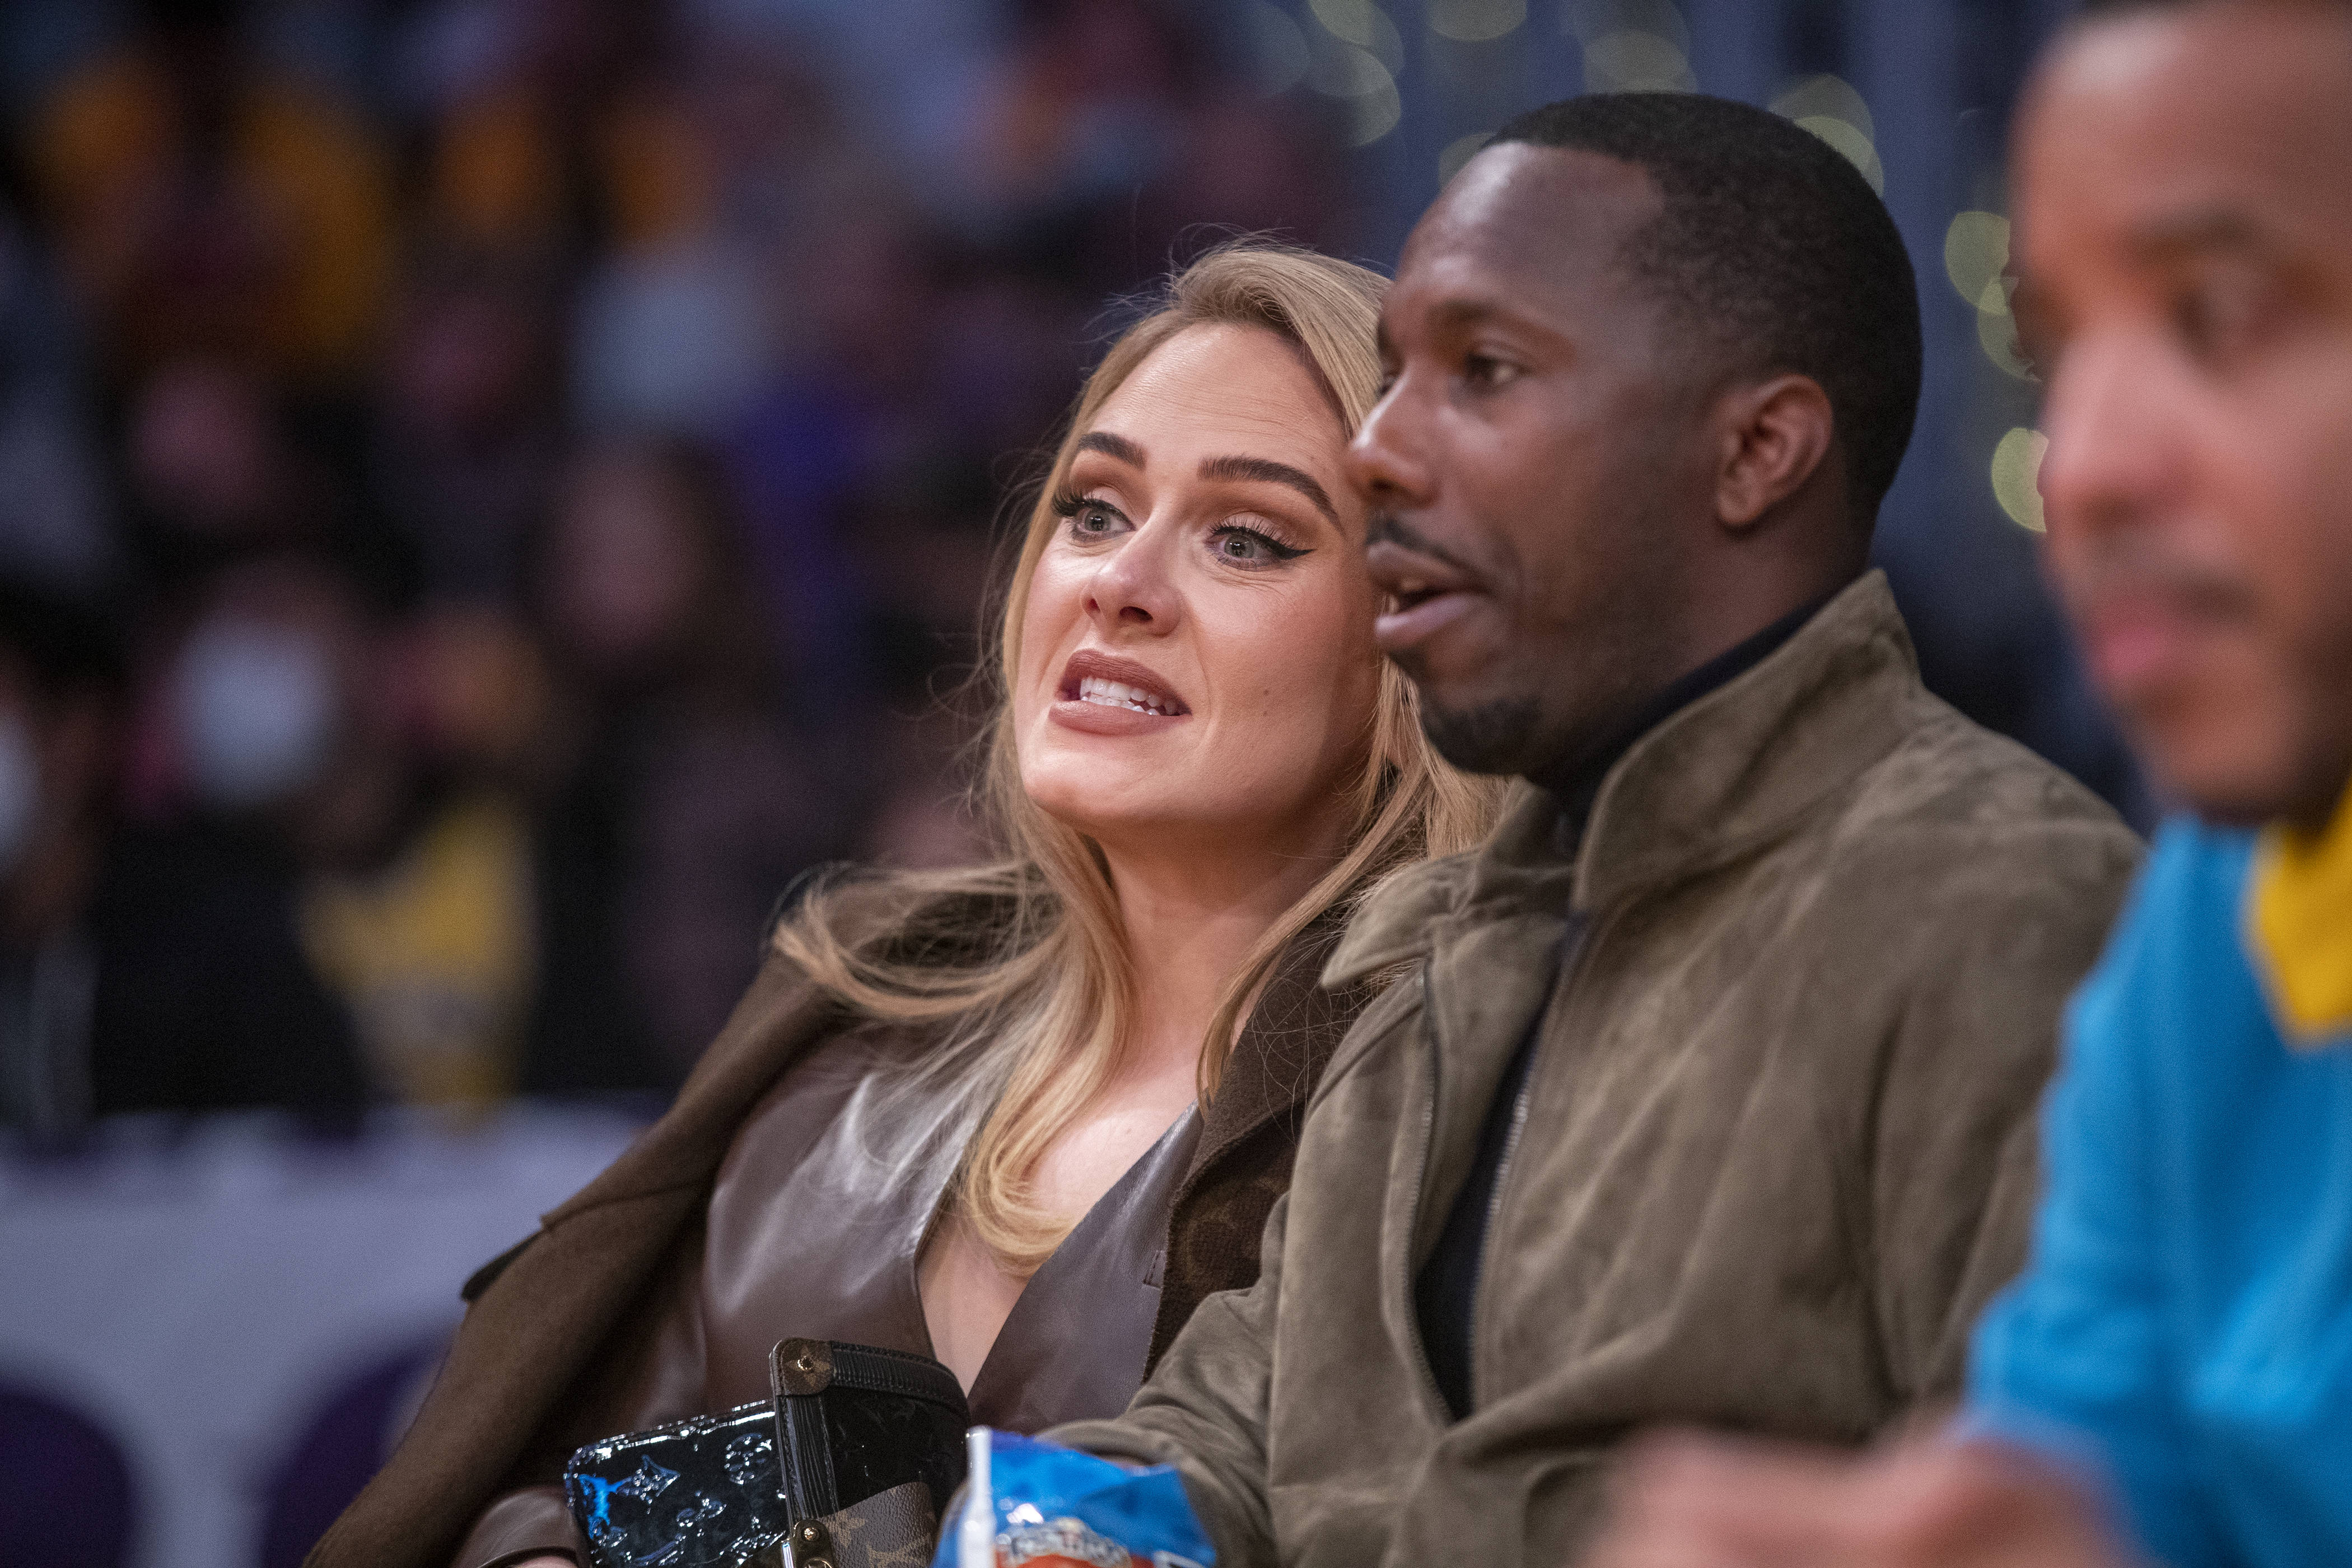 Adele Hides in Car with Rich Paul, First Clear Photos Since Vegas